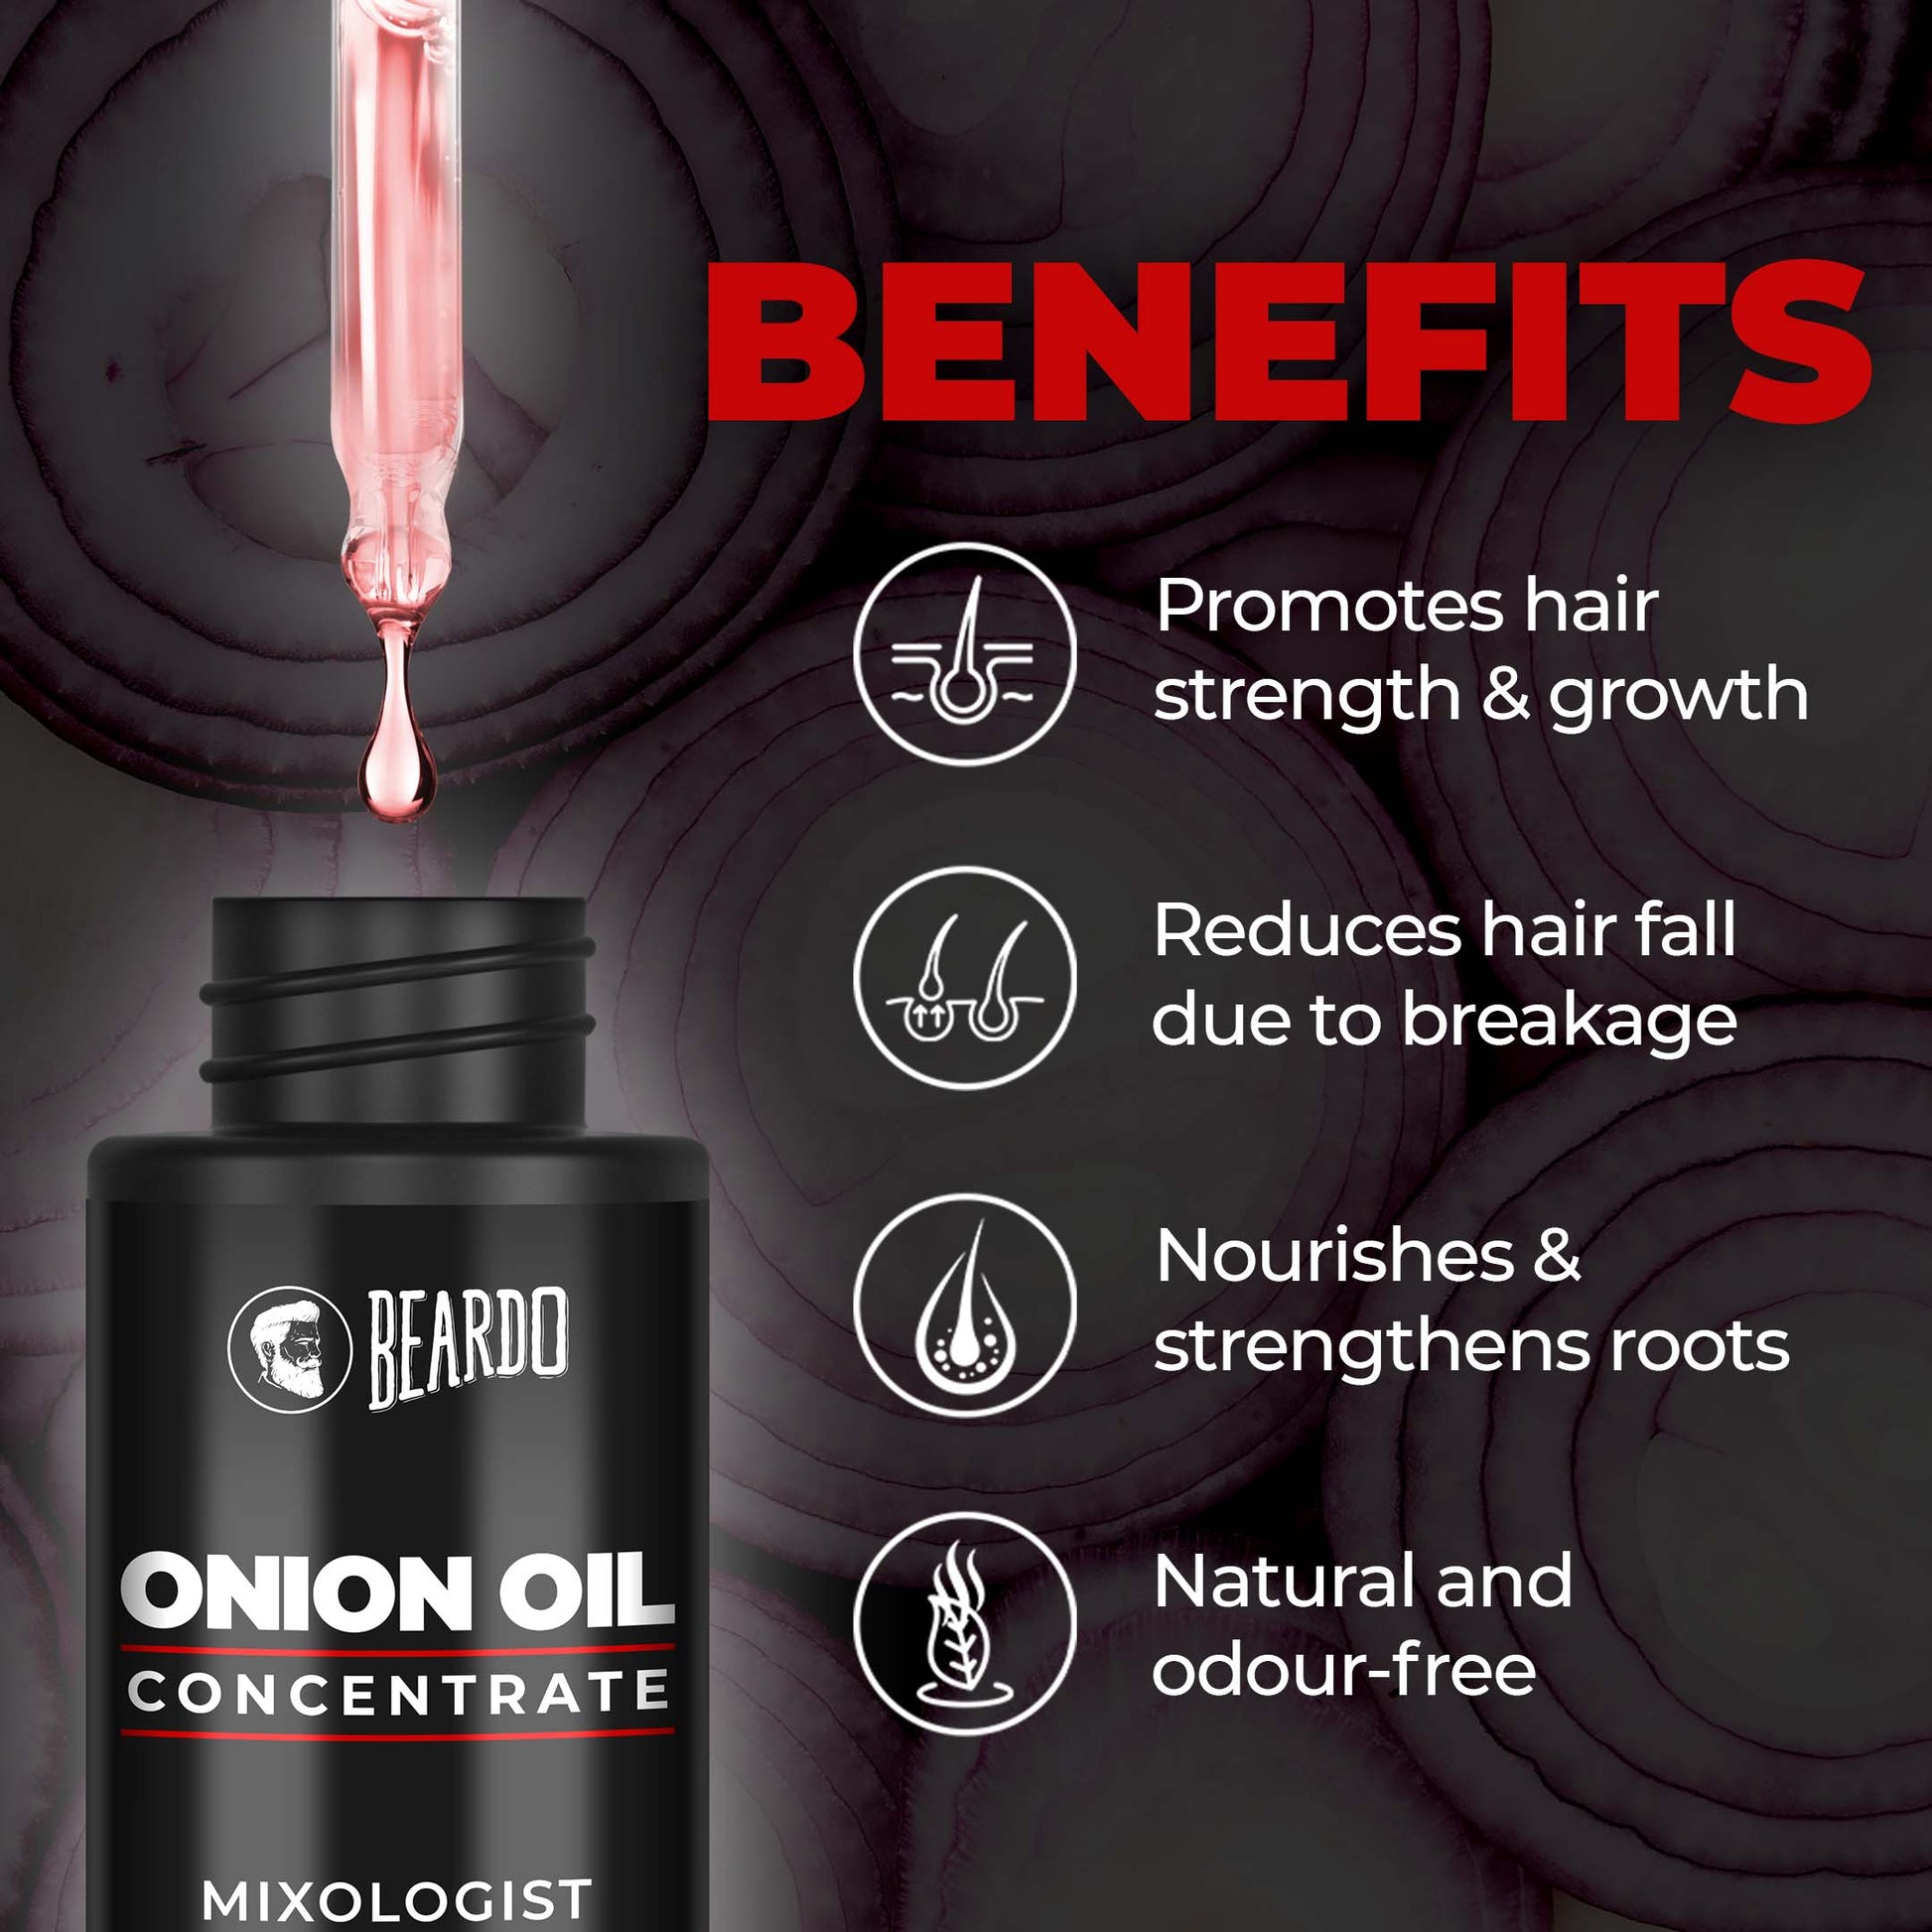 odour free, strengthens roots, hair fall, prevent hair fall